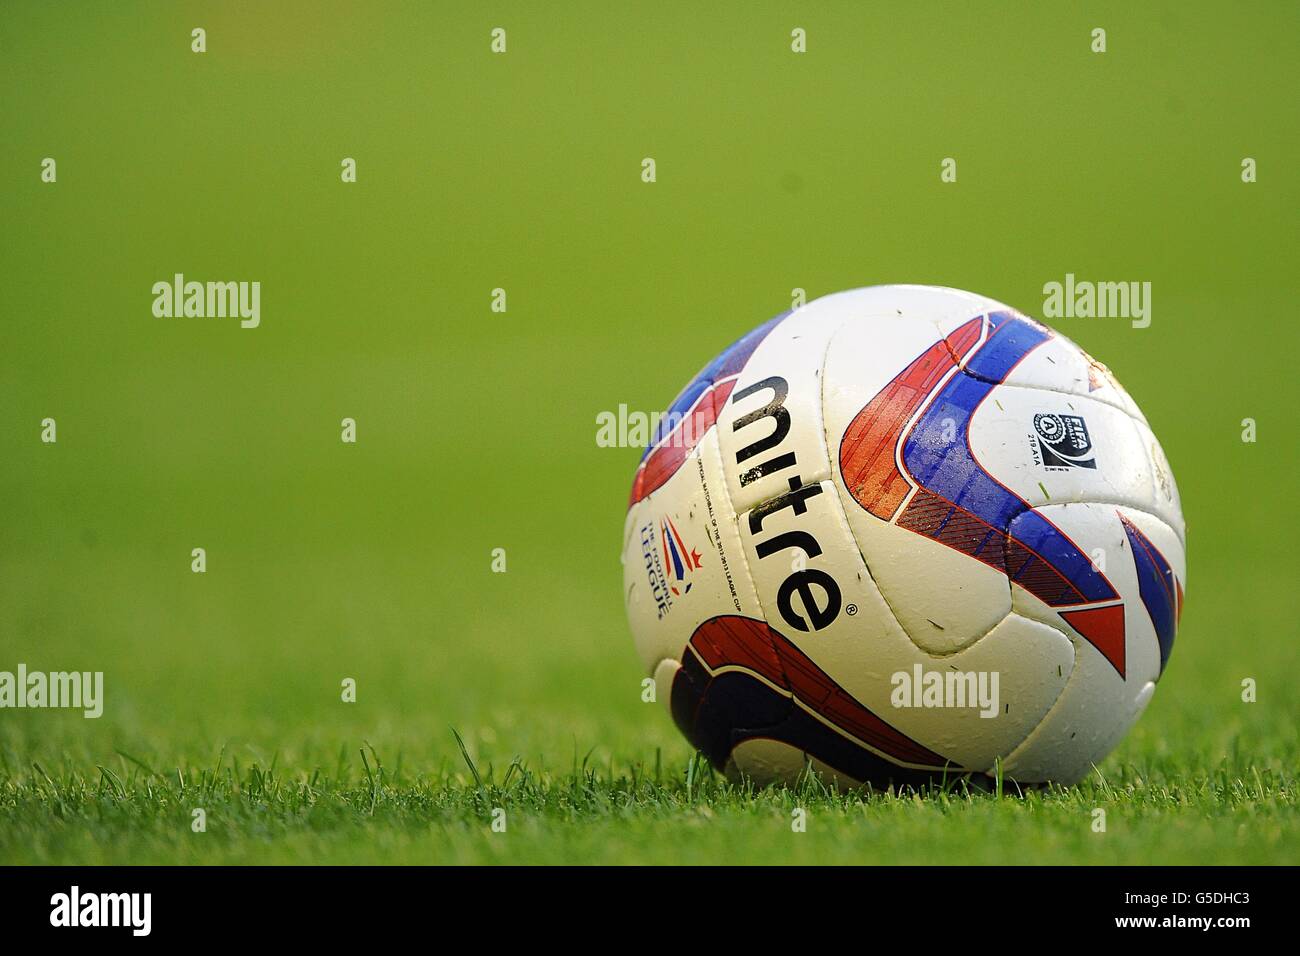 Soccer - Capital One Cup - Second Round - Everton v Leyton Orient - Goodison Park. General view of the match ball Stock Photo